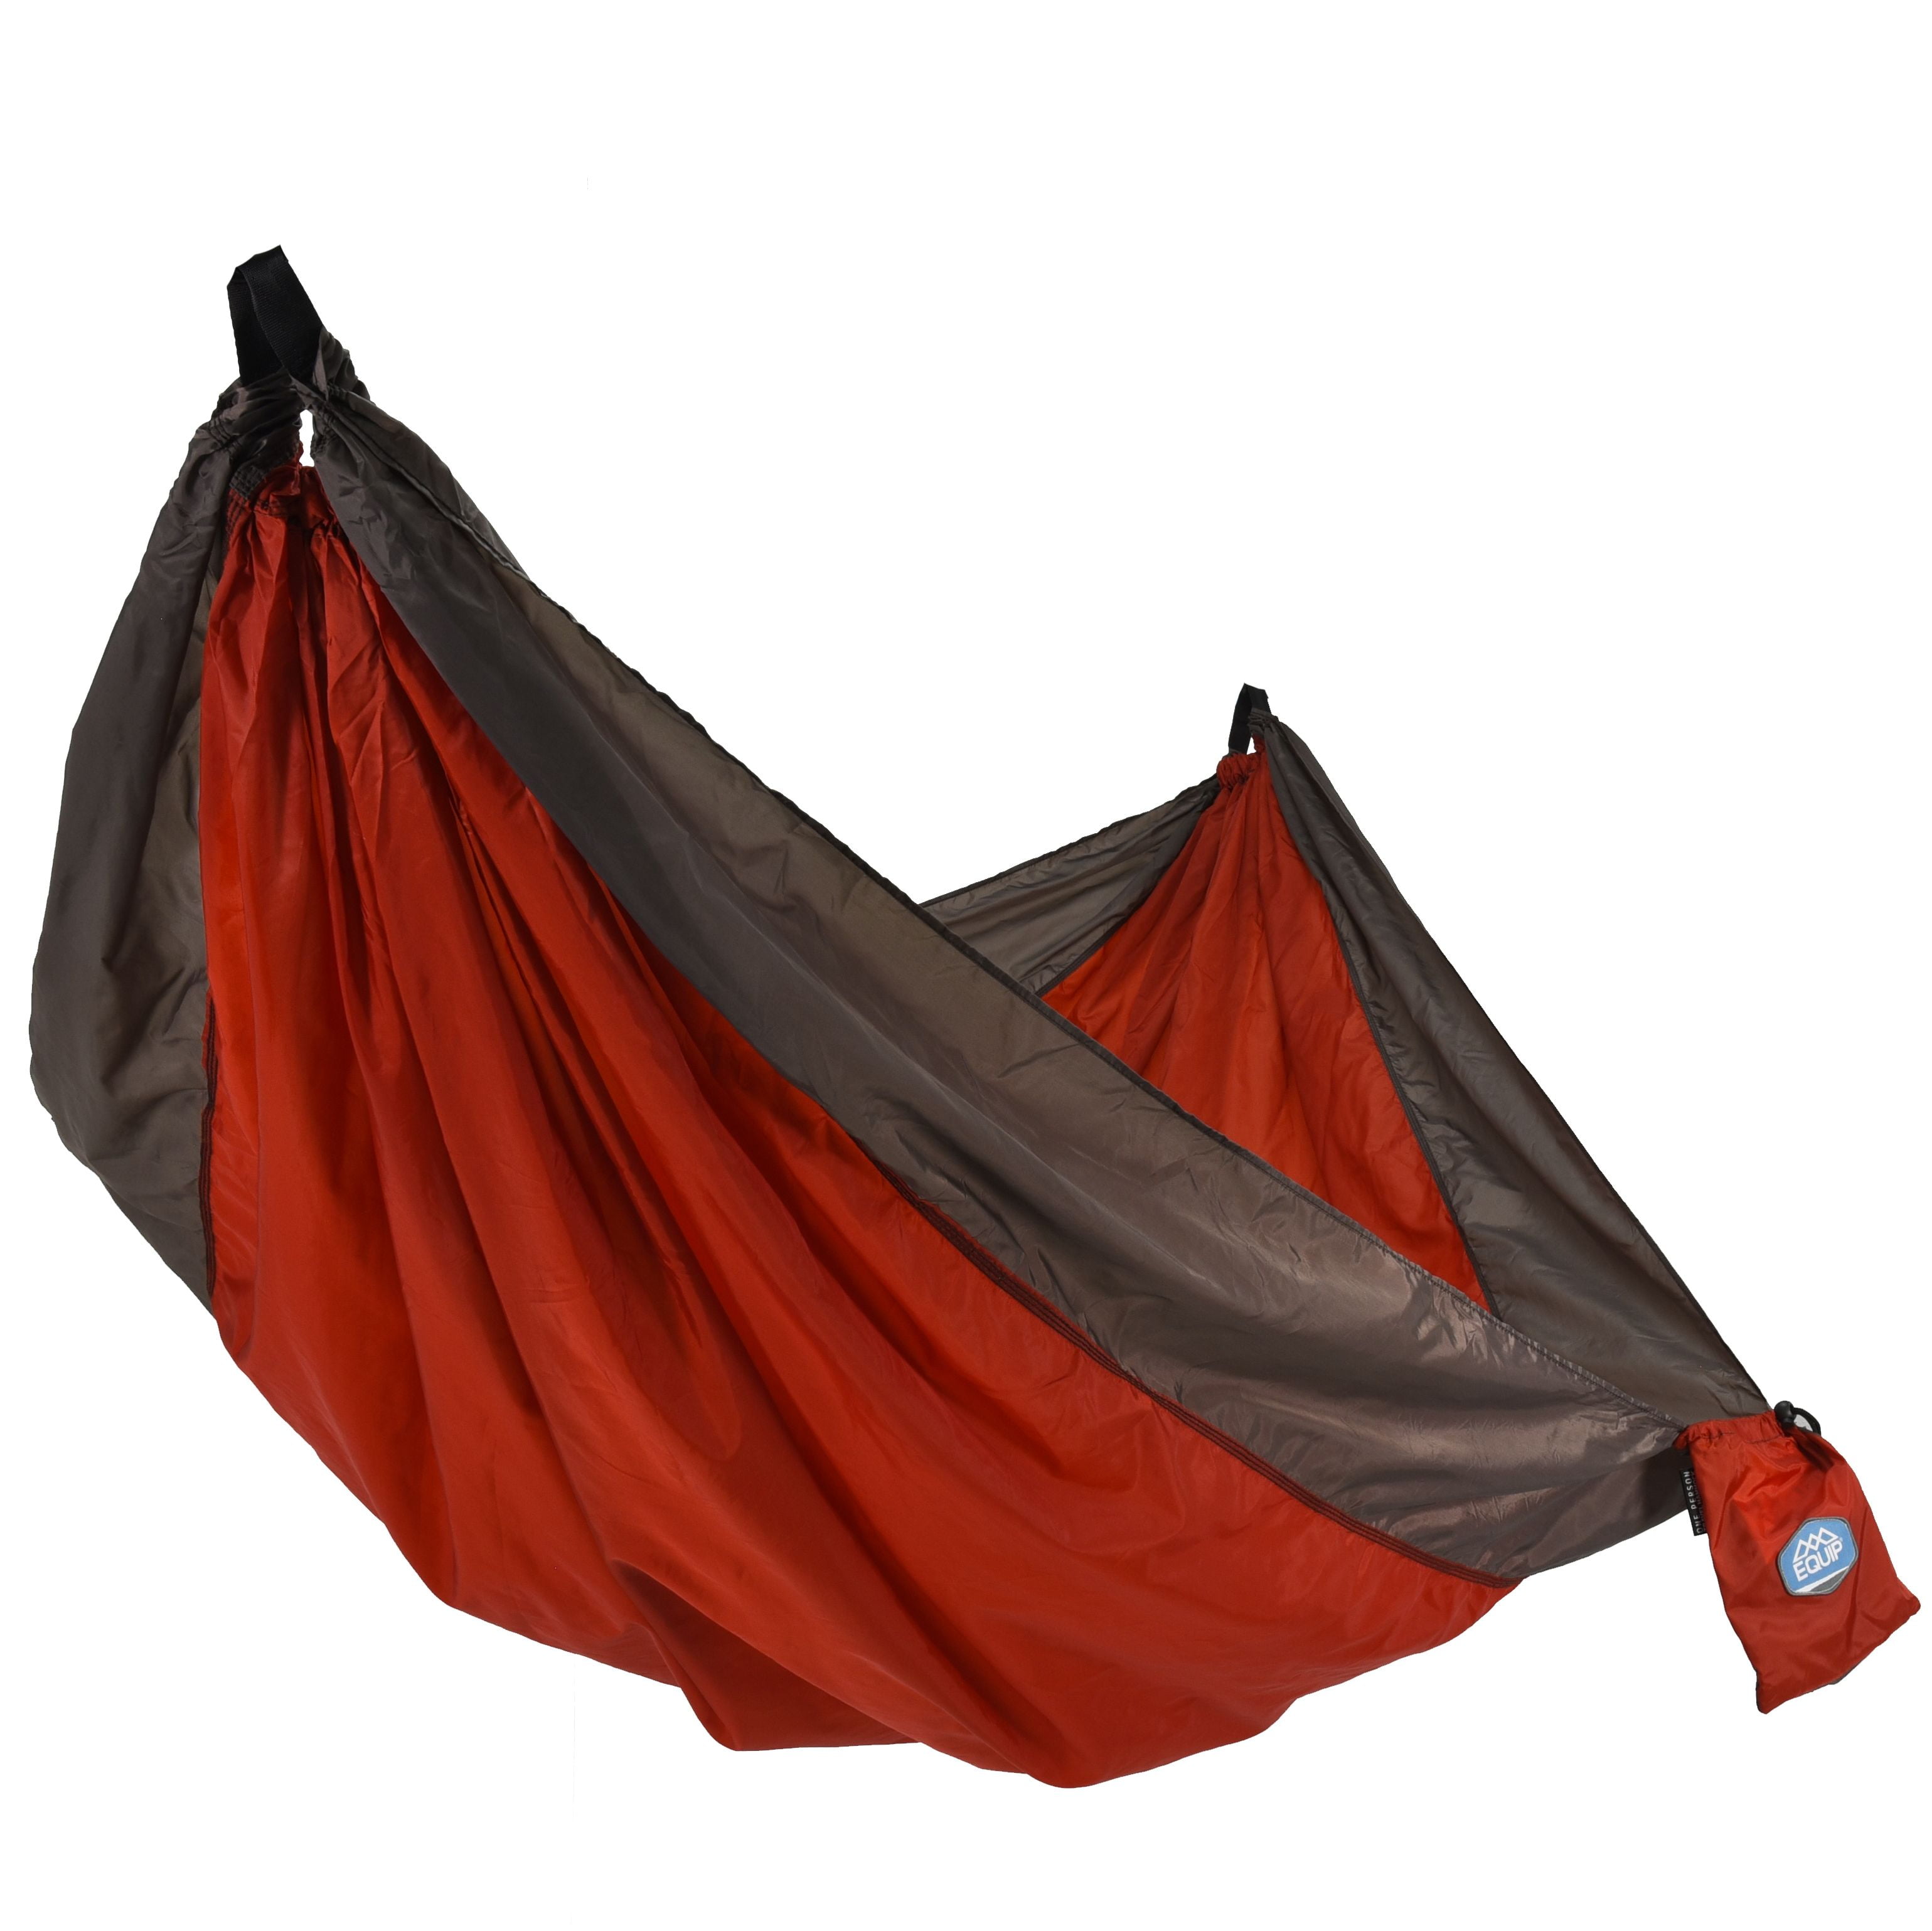 Equip Lightweight Portable Nylon Camping Travel Hammock, 1 Person Red and  Taupe, Size 116